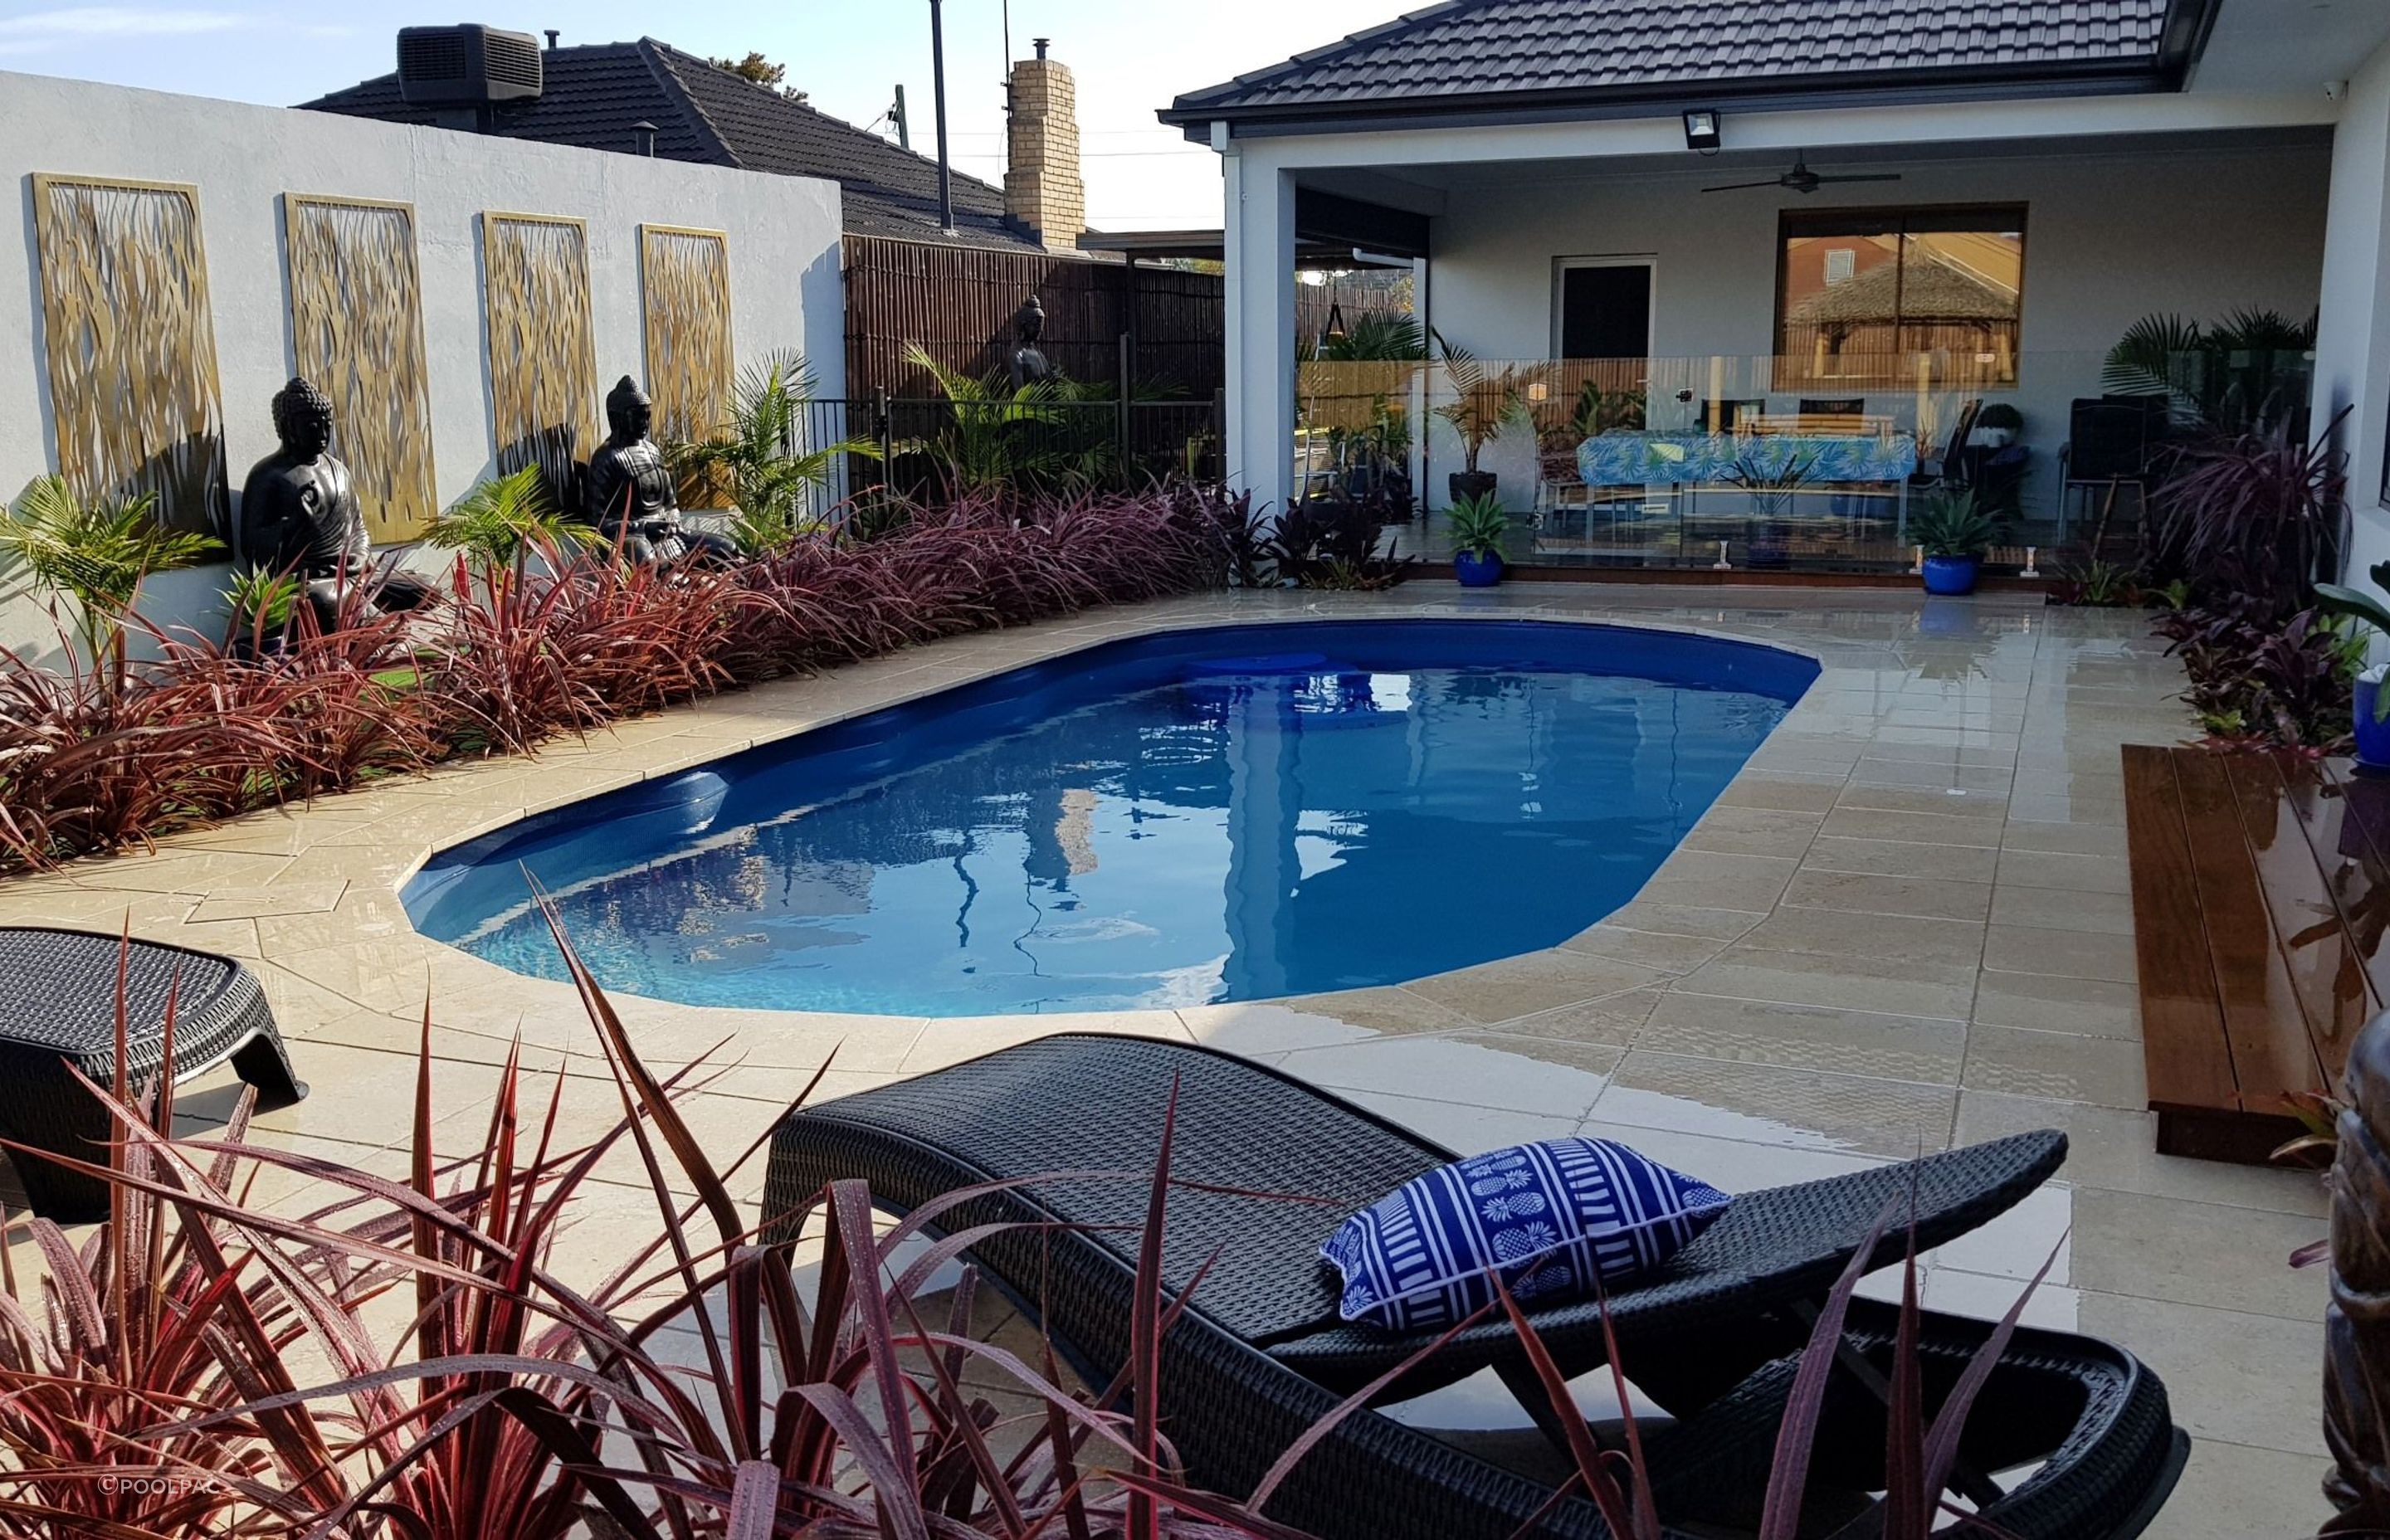 Oval pools, like the Classic Majestic Swimming Pool by Poolpac, enhance the natural feel of an outdoor living space.